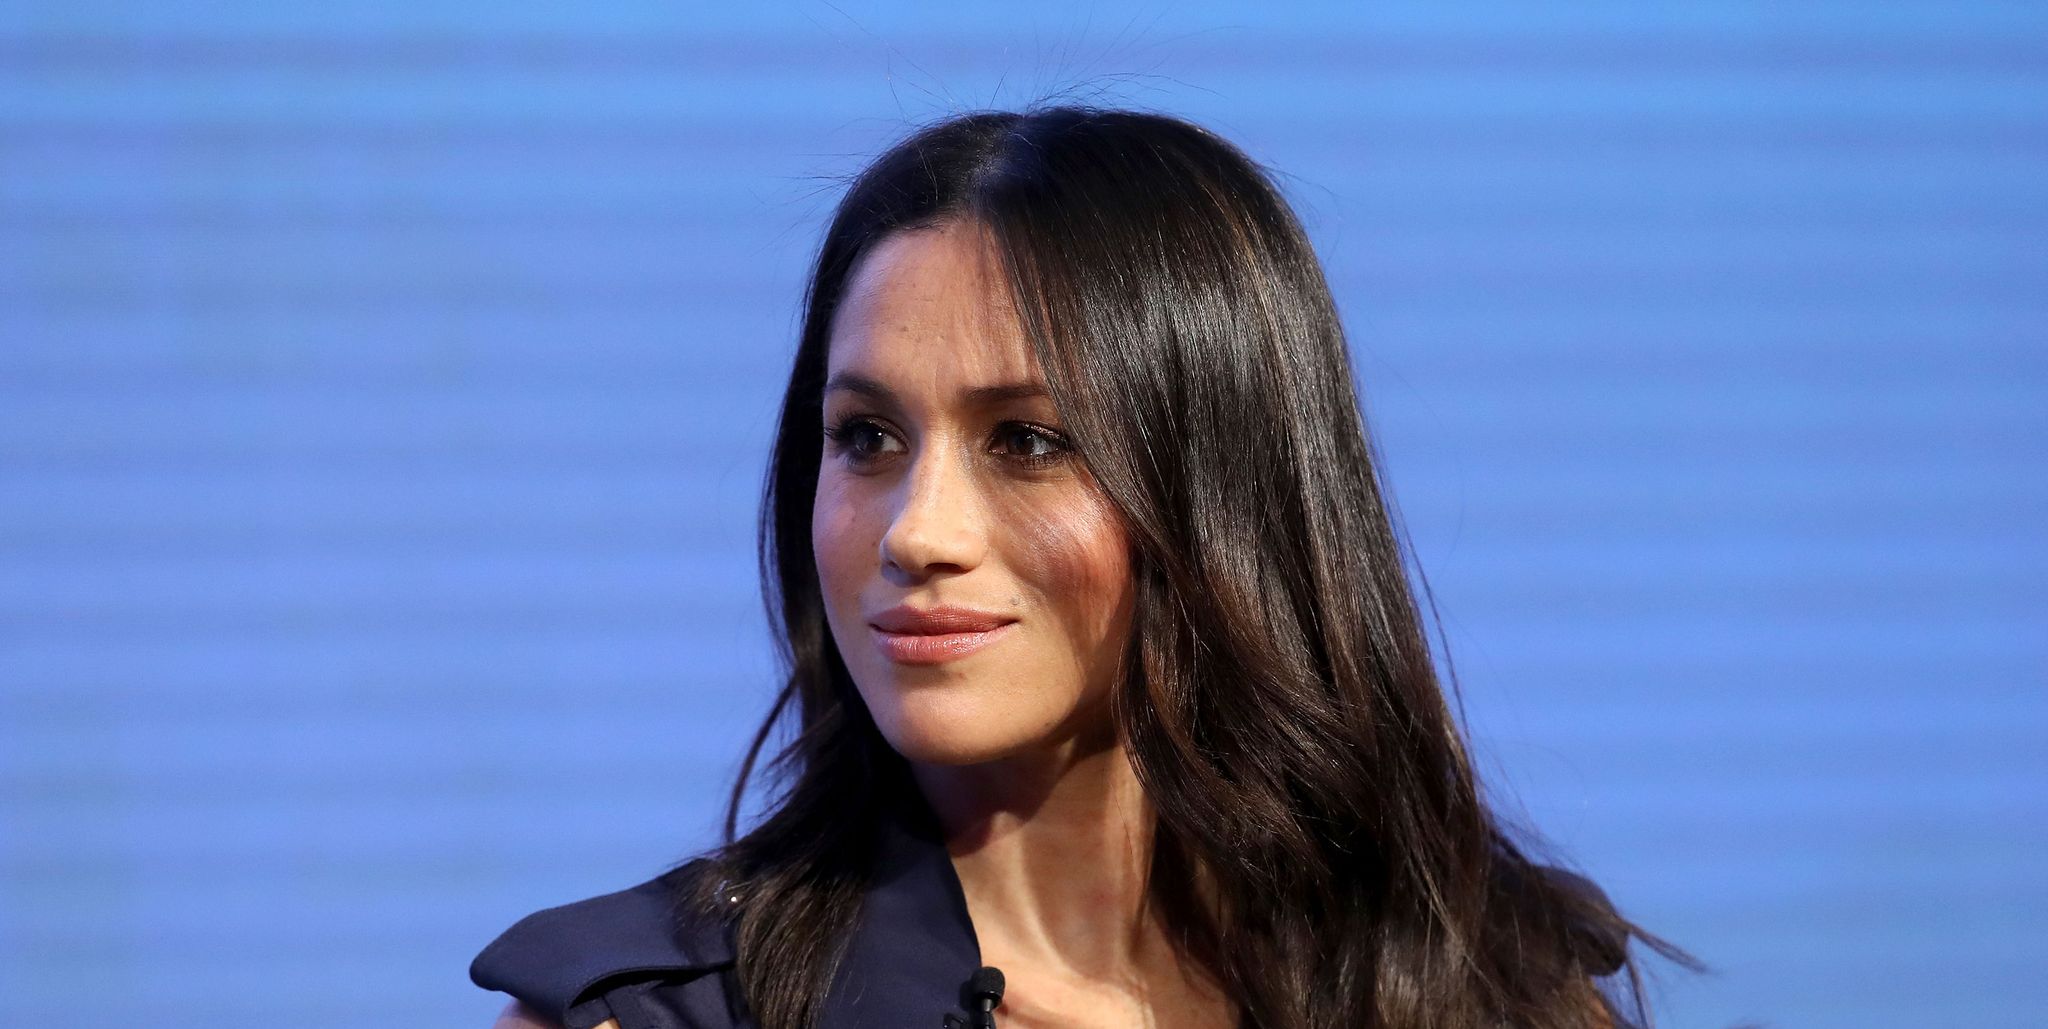 Meghan Markle at the Royal Foundation forum